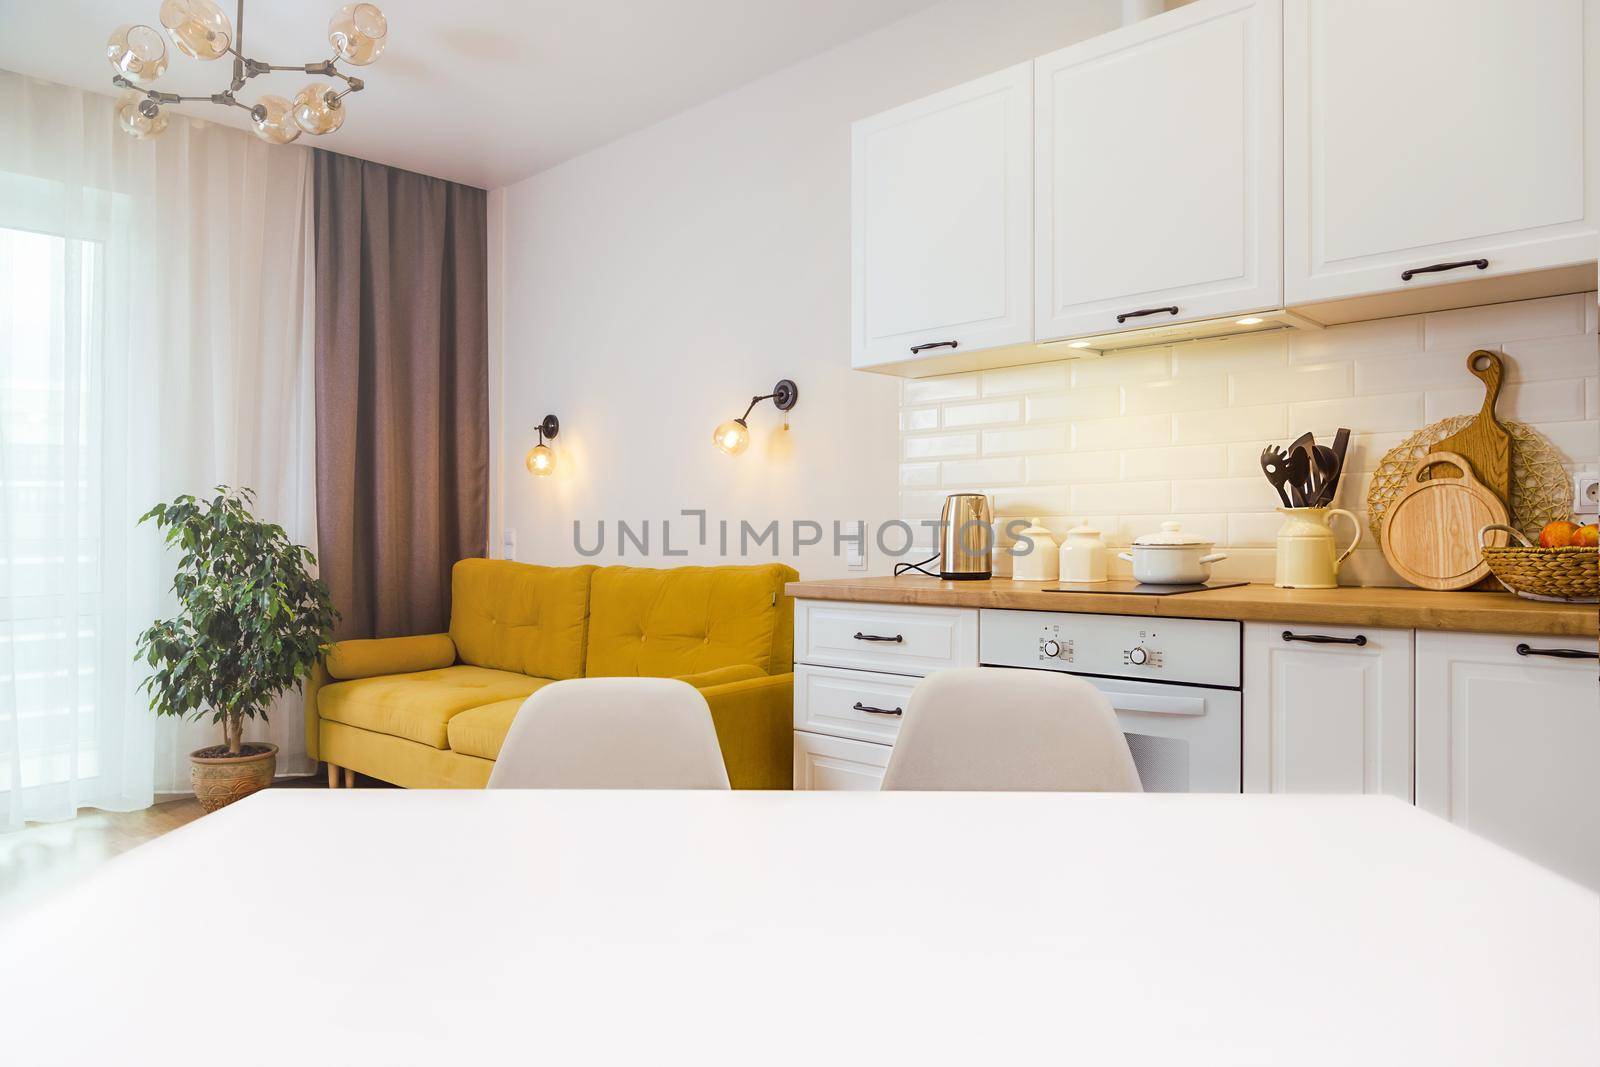 Mockup, empty table in bright kitchen interior. Copy paste for your design by Ramanouskaya